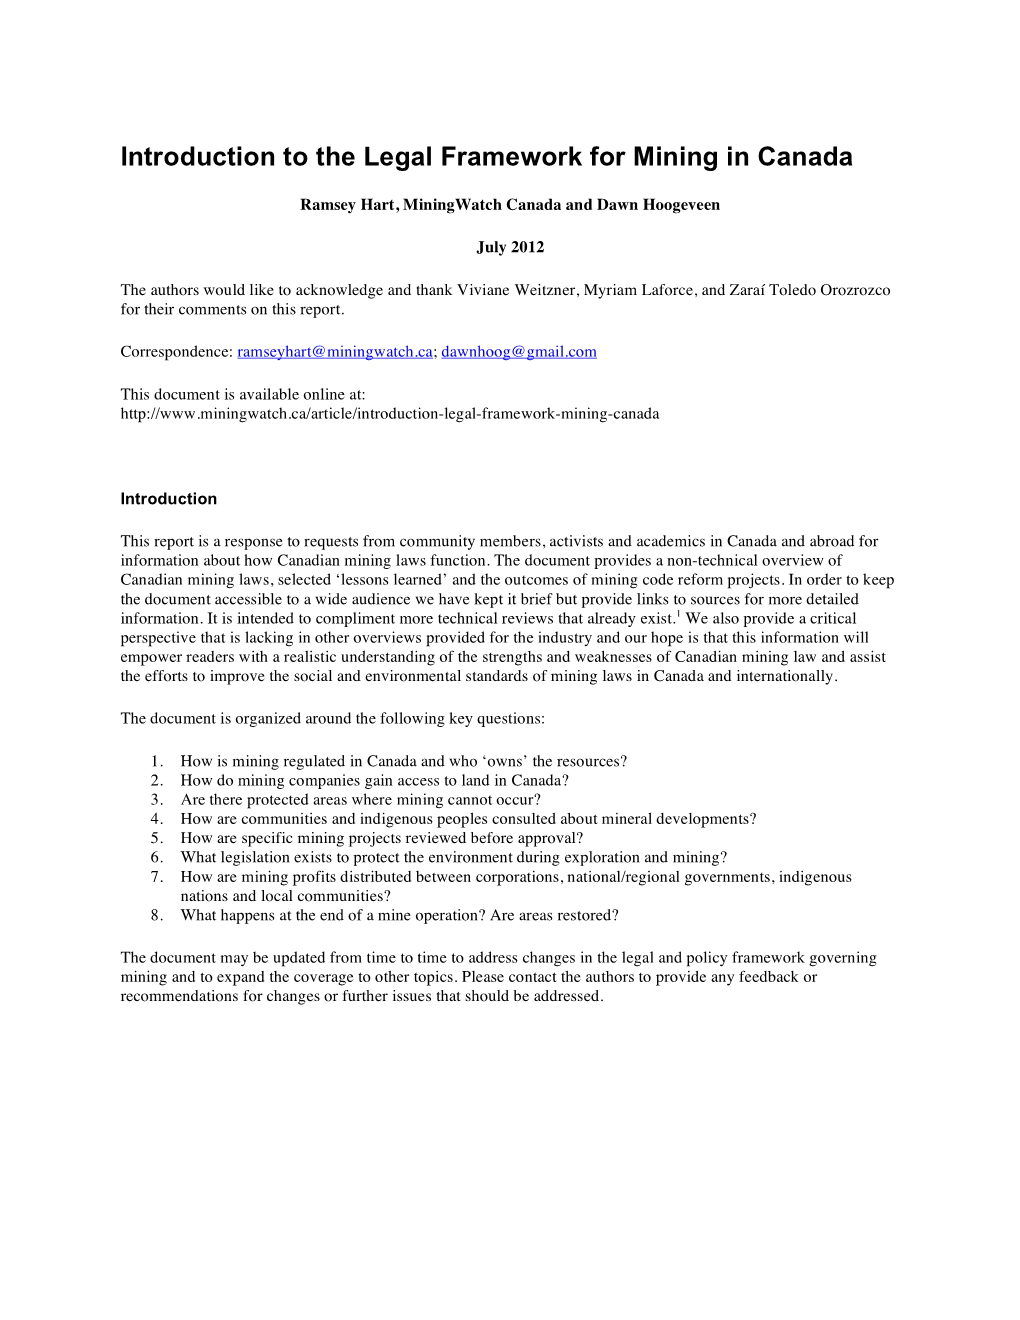 Introduction to the Legal Framework for Mining in Canada